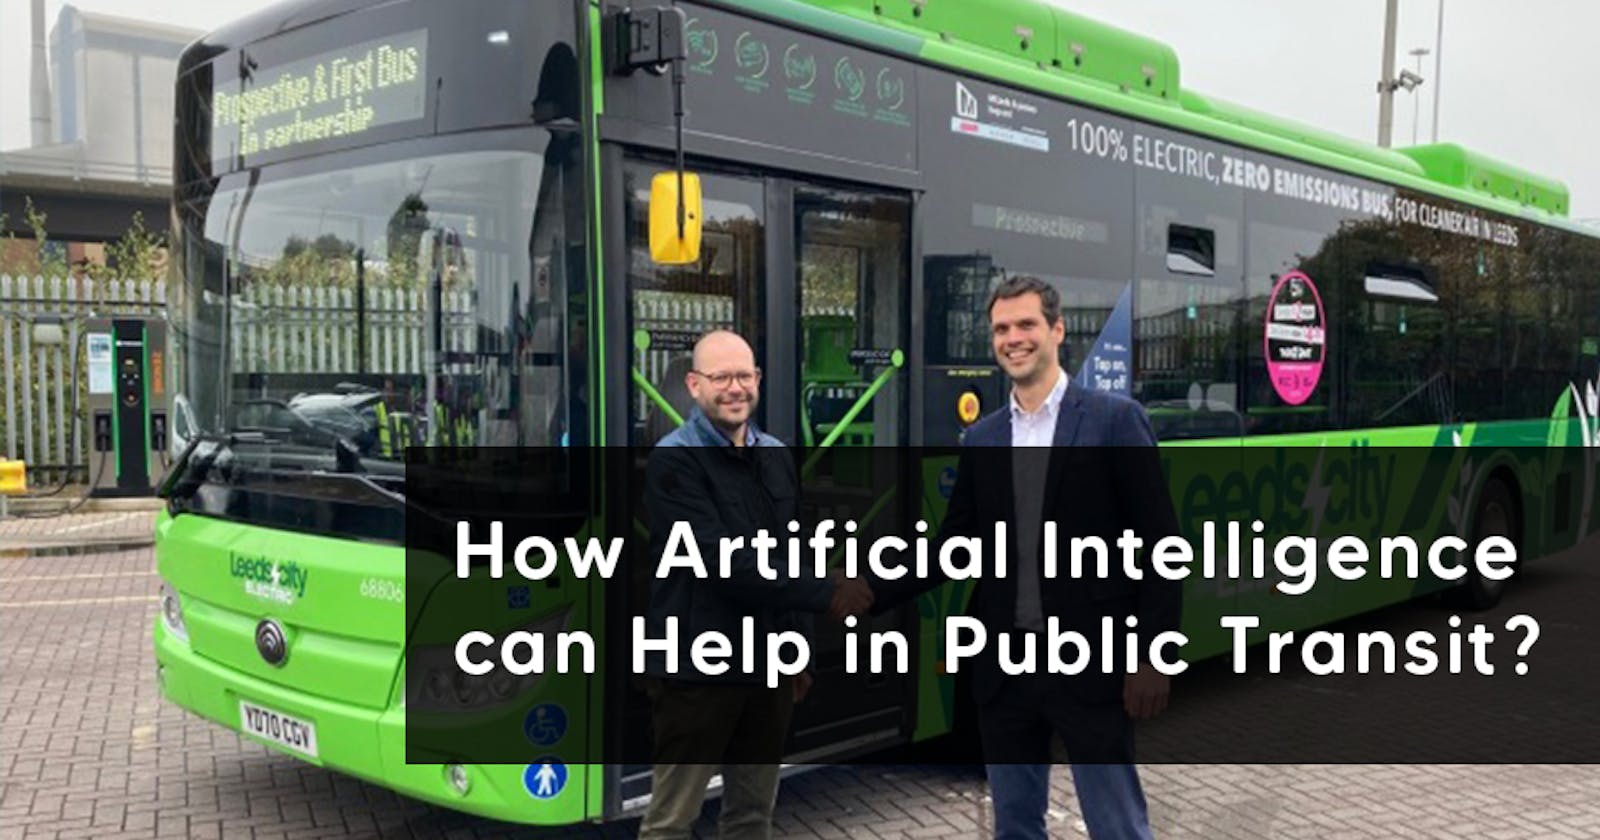 How Artificial Intelligence can Help in Public Transit?